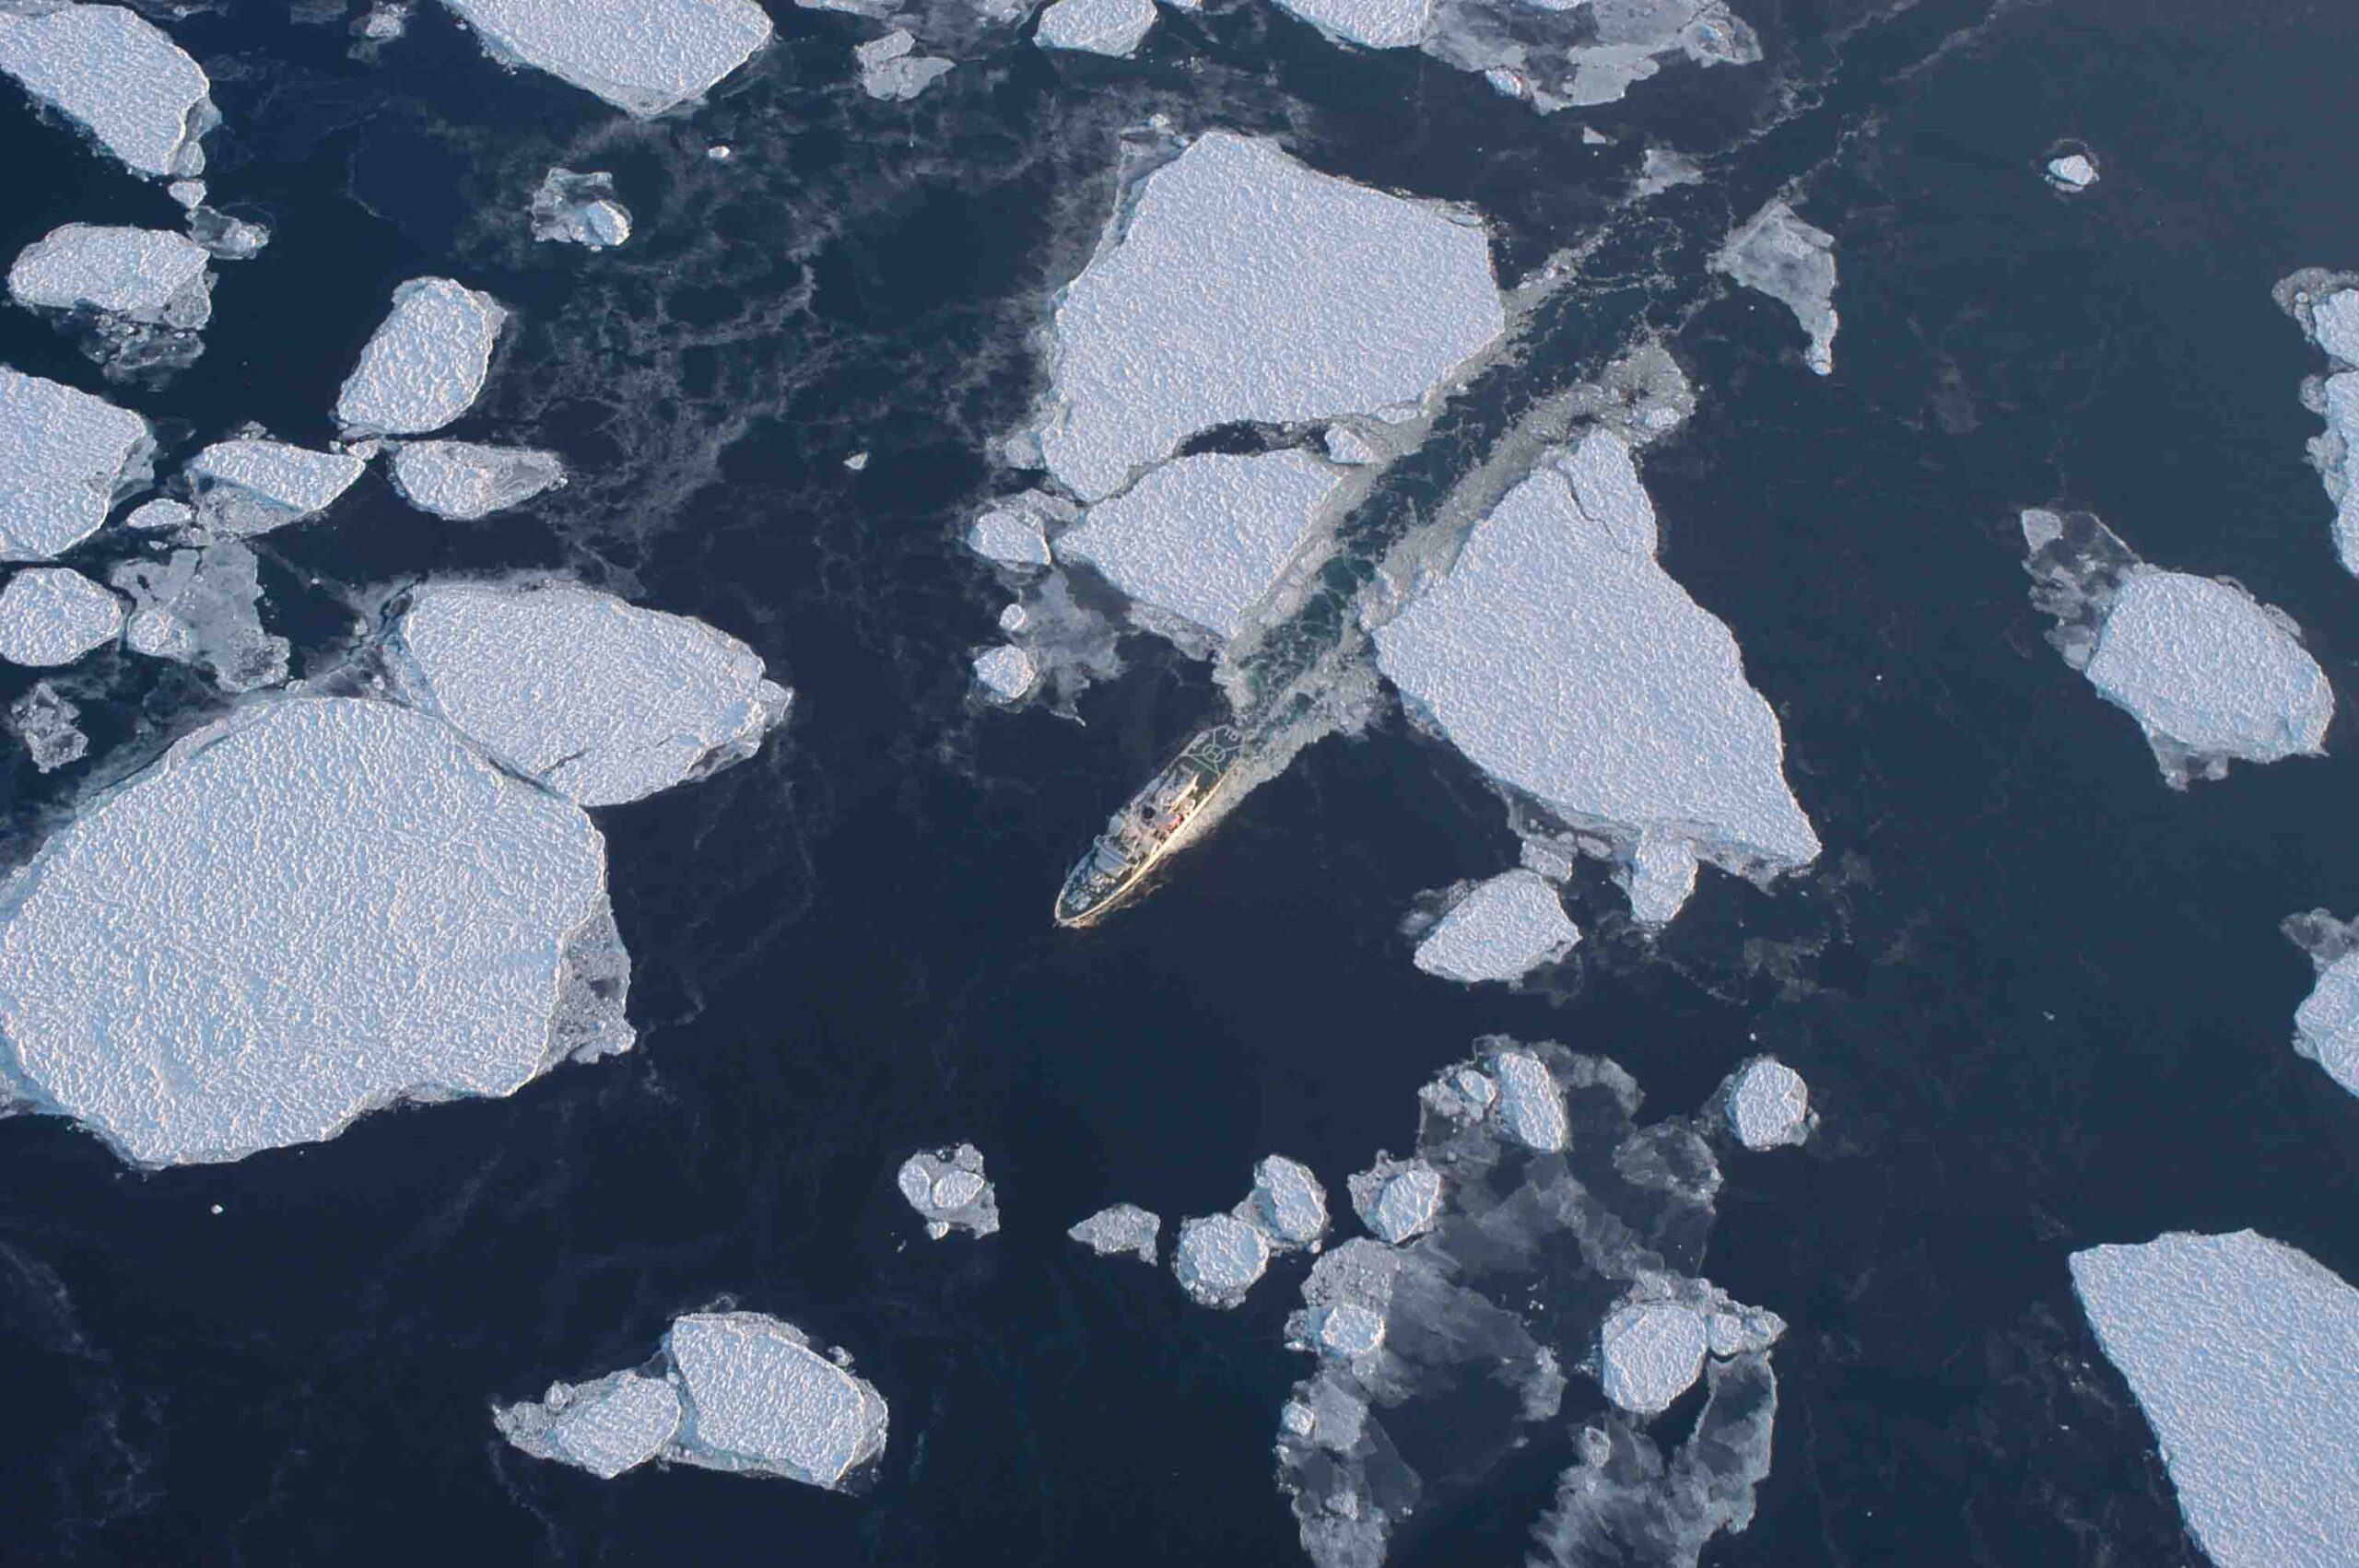 An aerial photograph of the icebreaking patrol vessel "Soya" breaking up sea ice, taken in 2015 by Kay I. Ohshima.